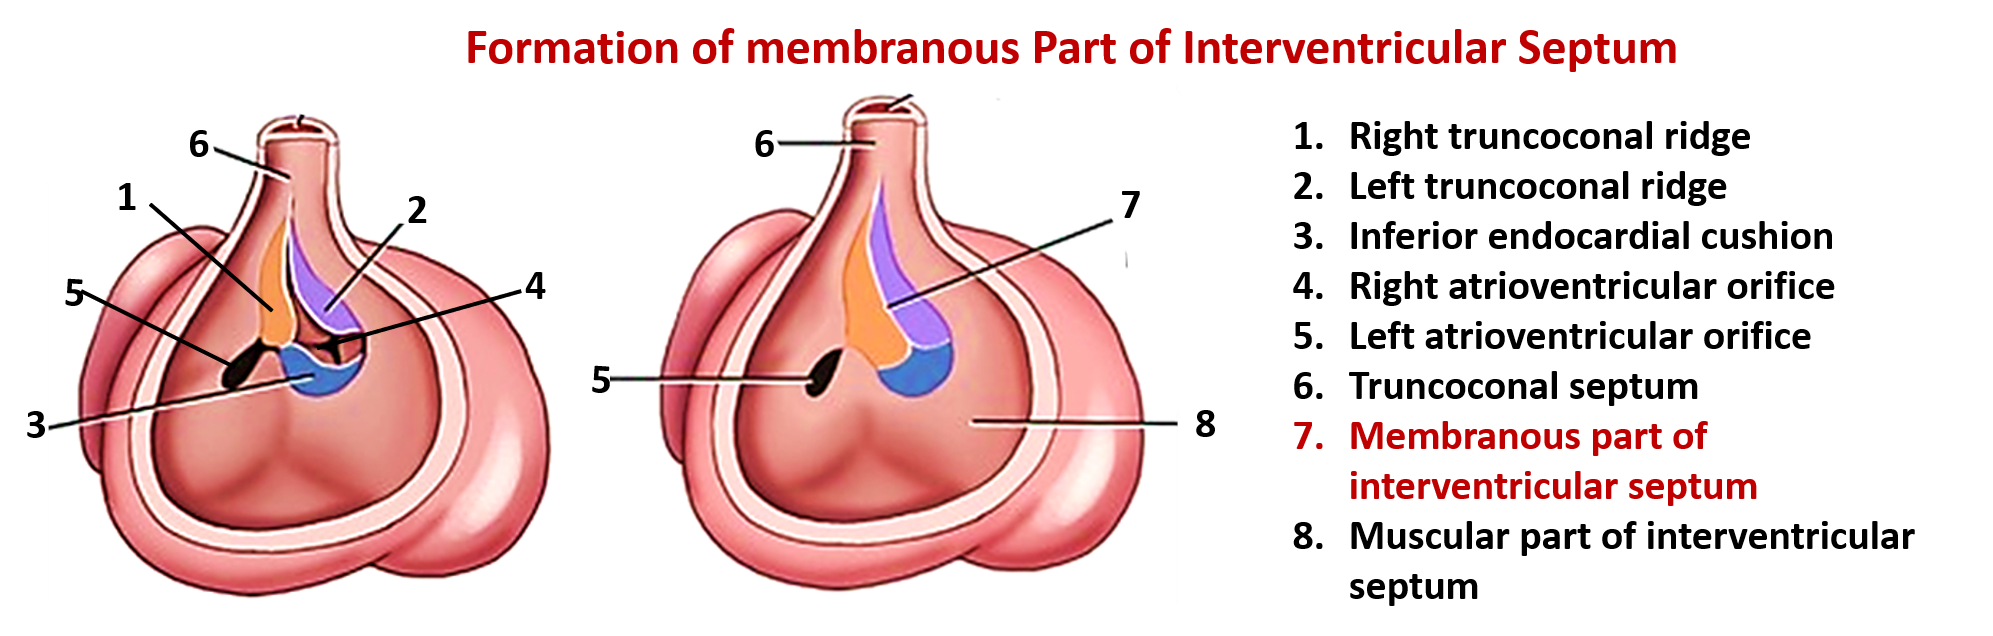 Formation of membranous part of interventricular septum